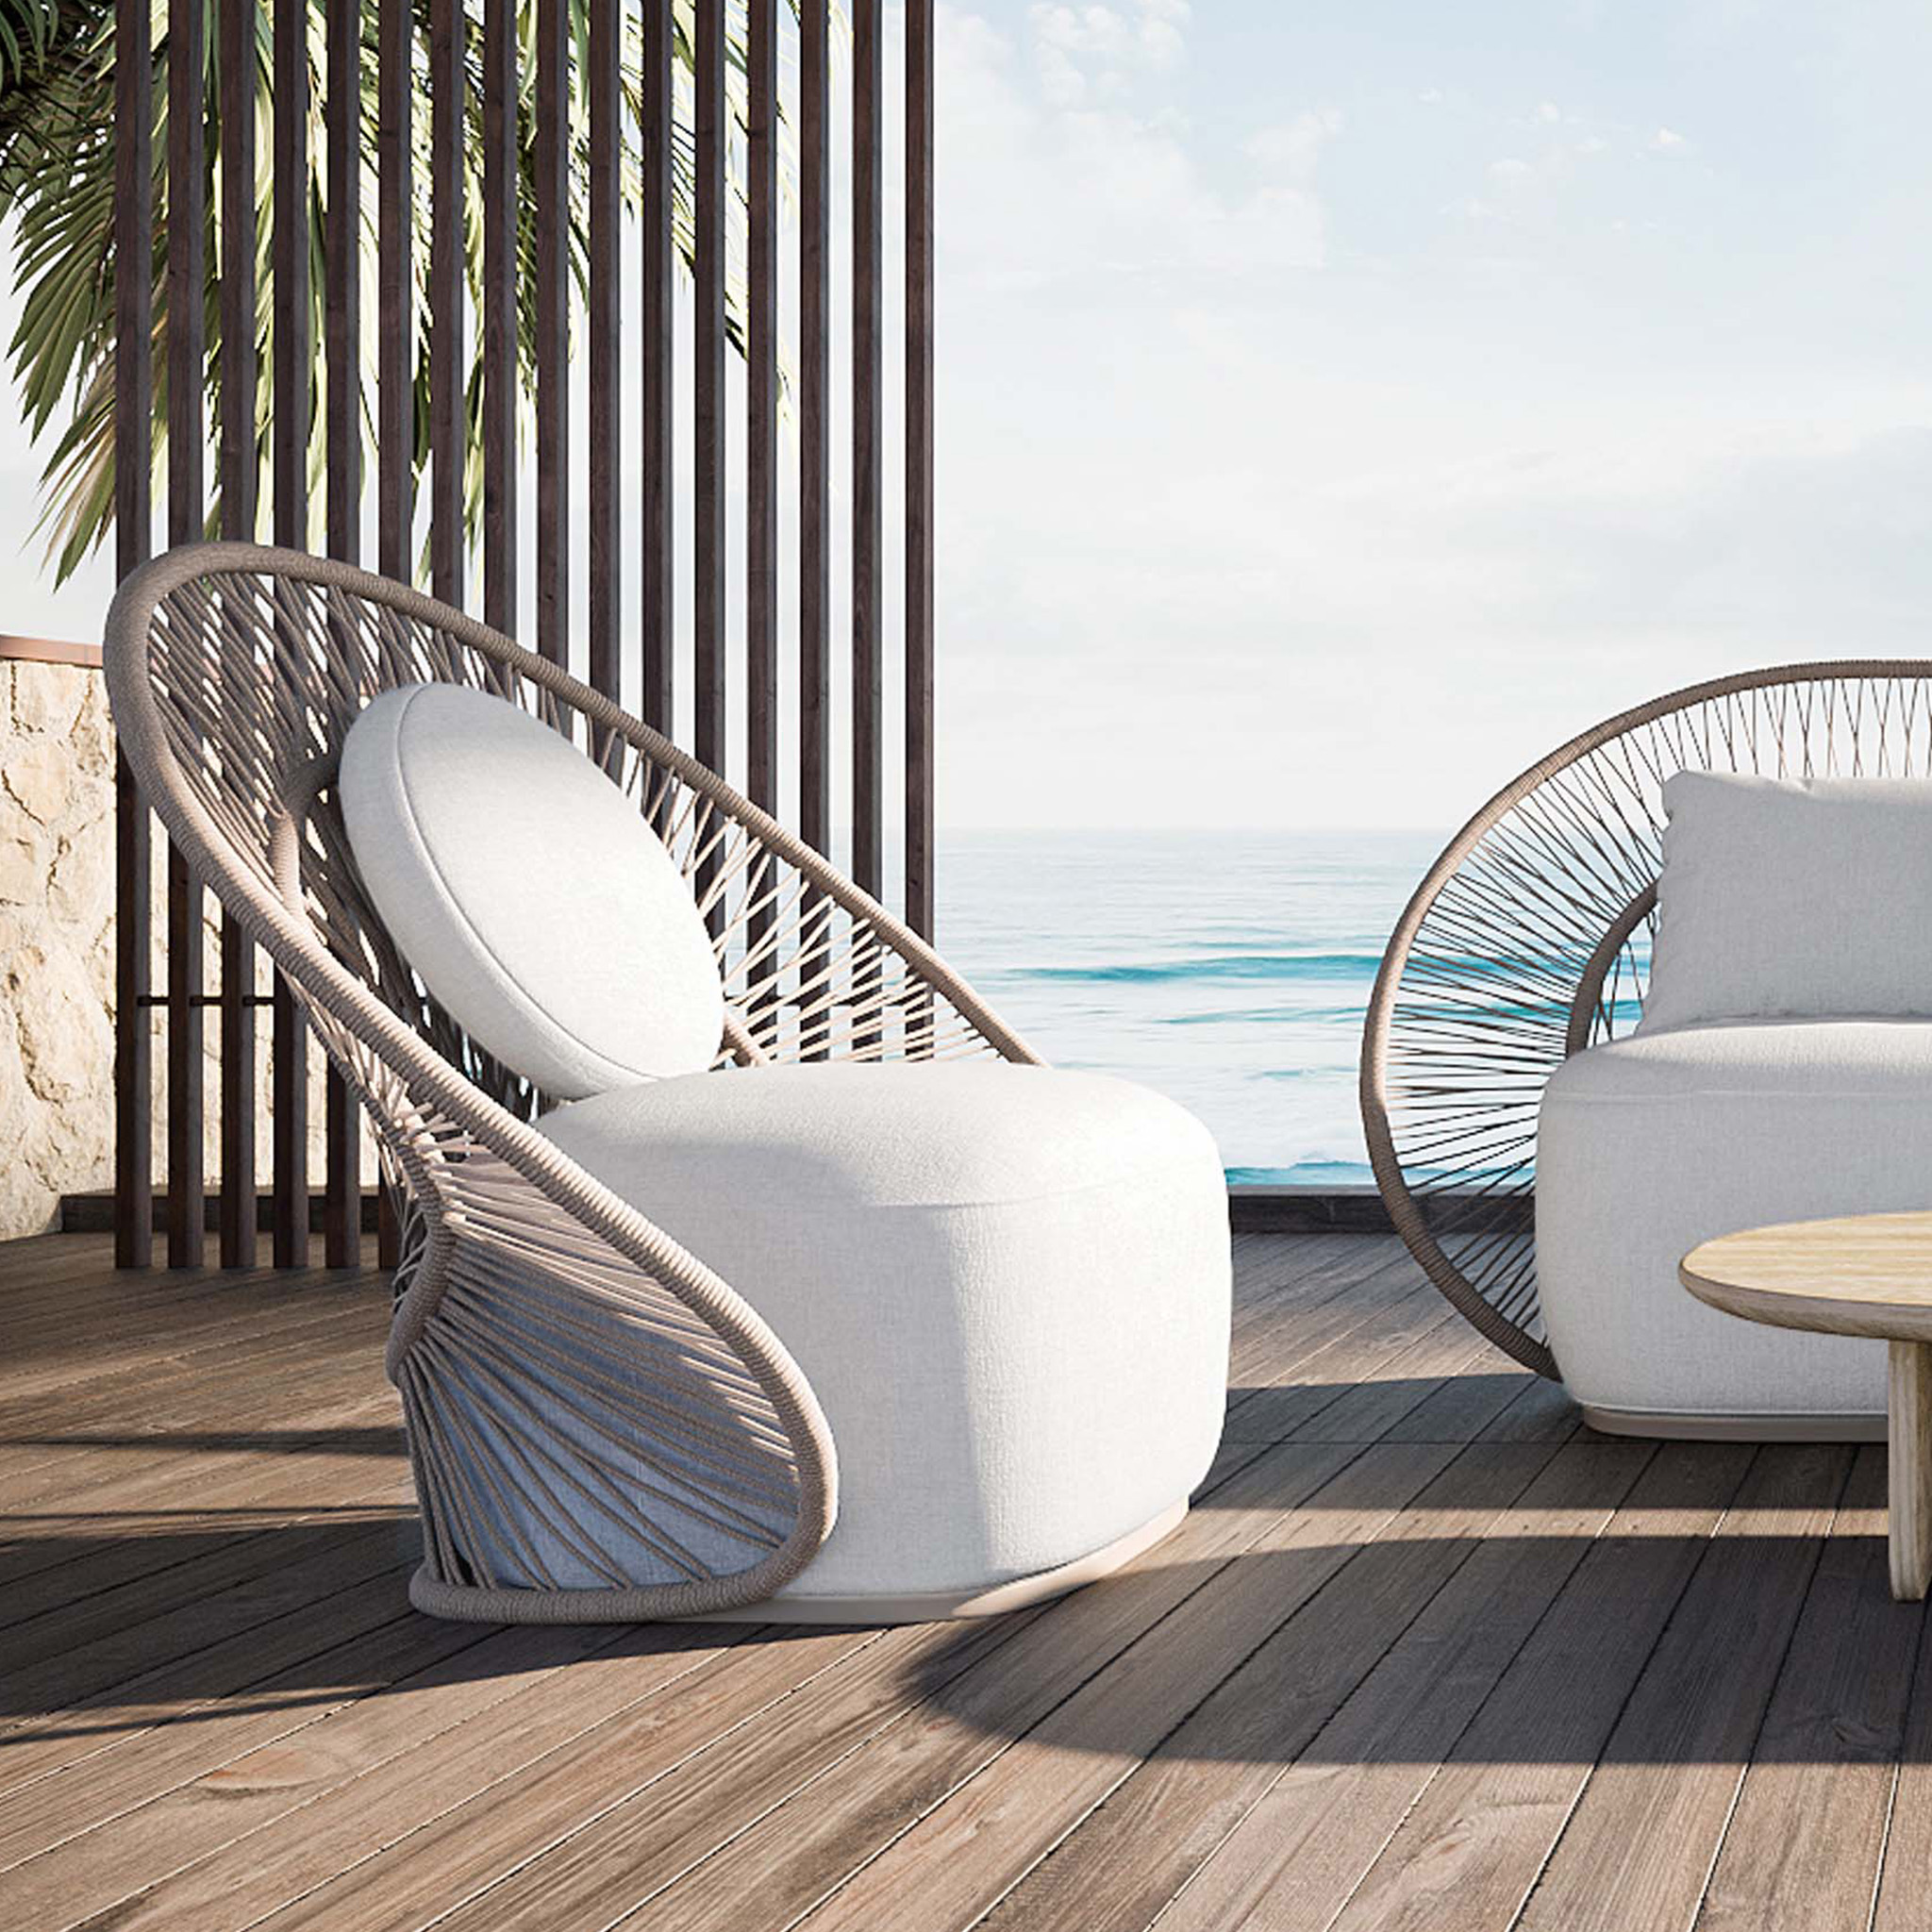 Seaside deck with furniture Sofa from Marcel Wanders studio Maui Collection for Harbour for all season use